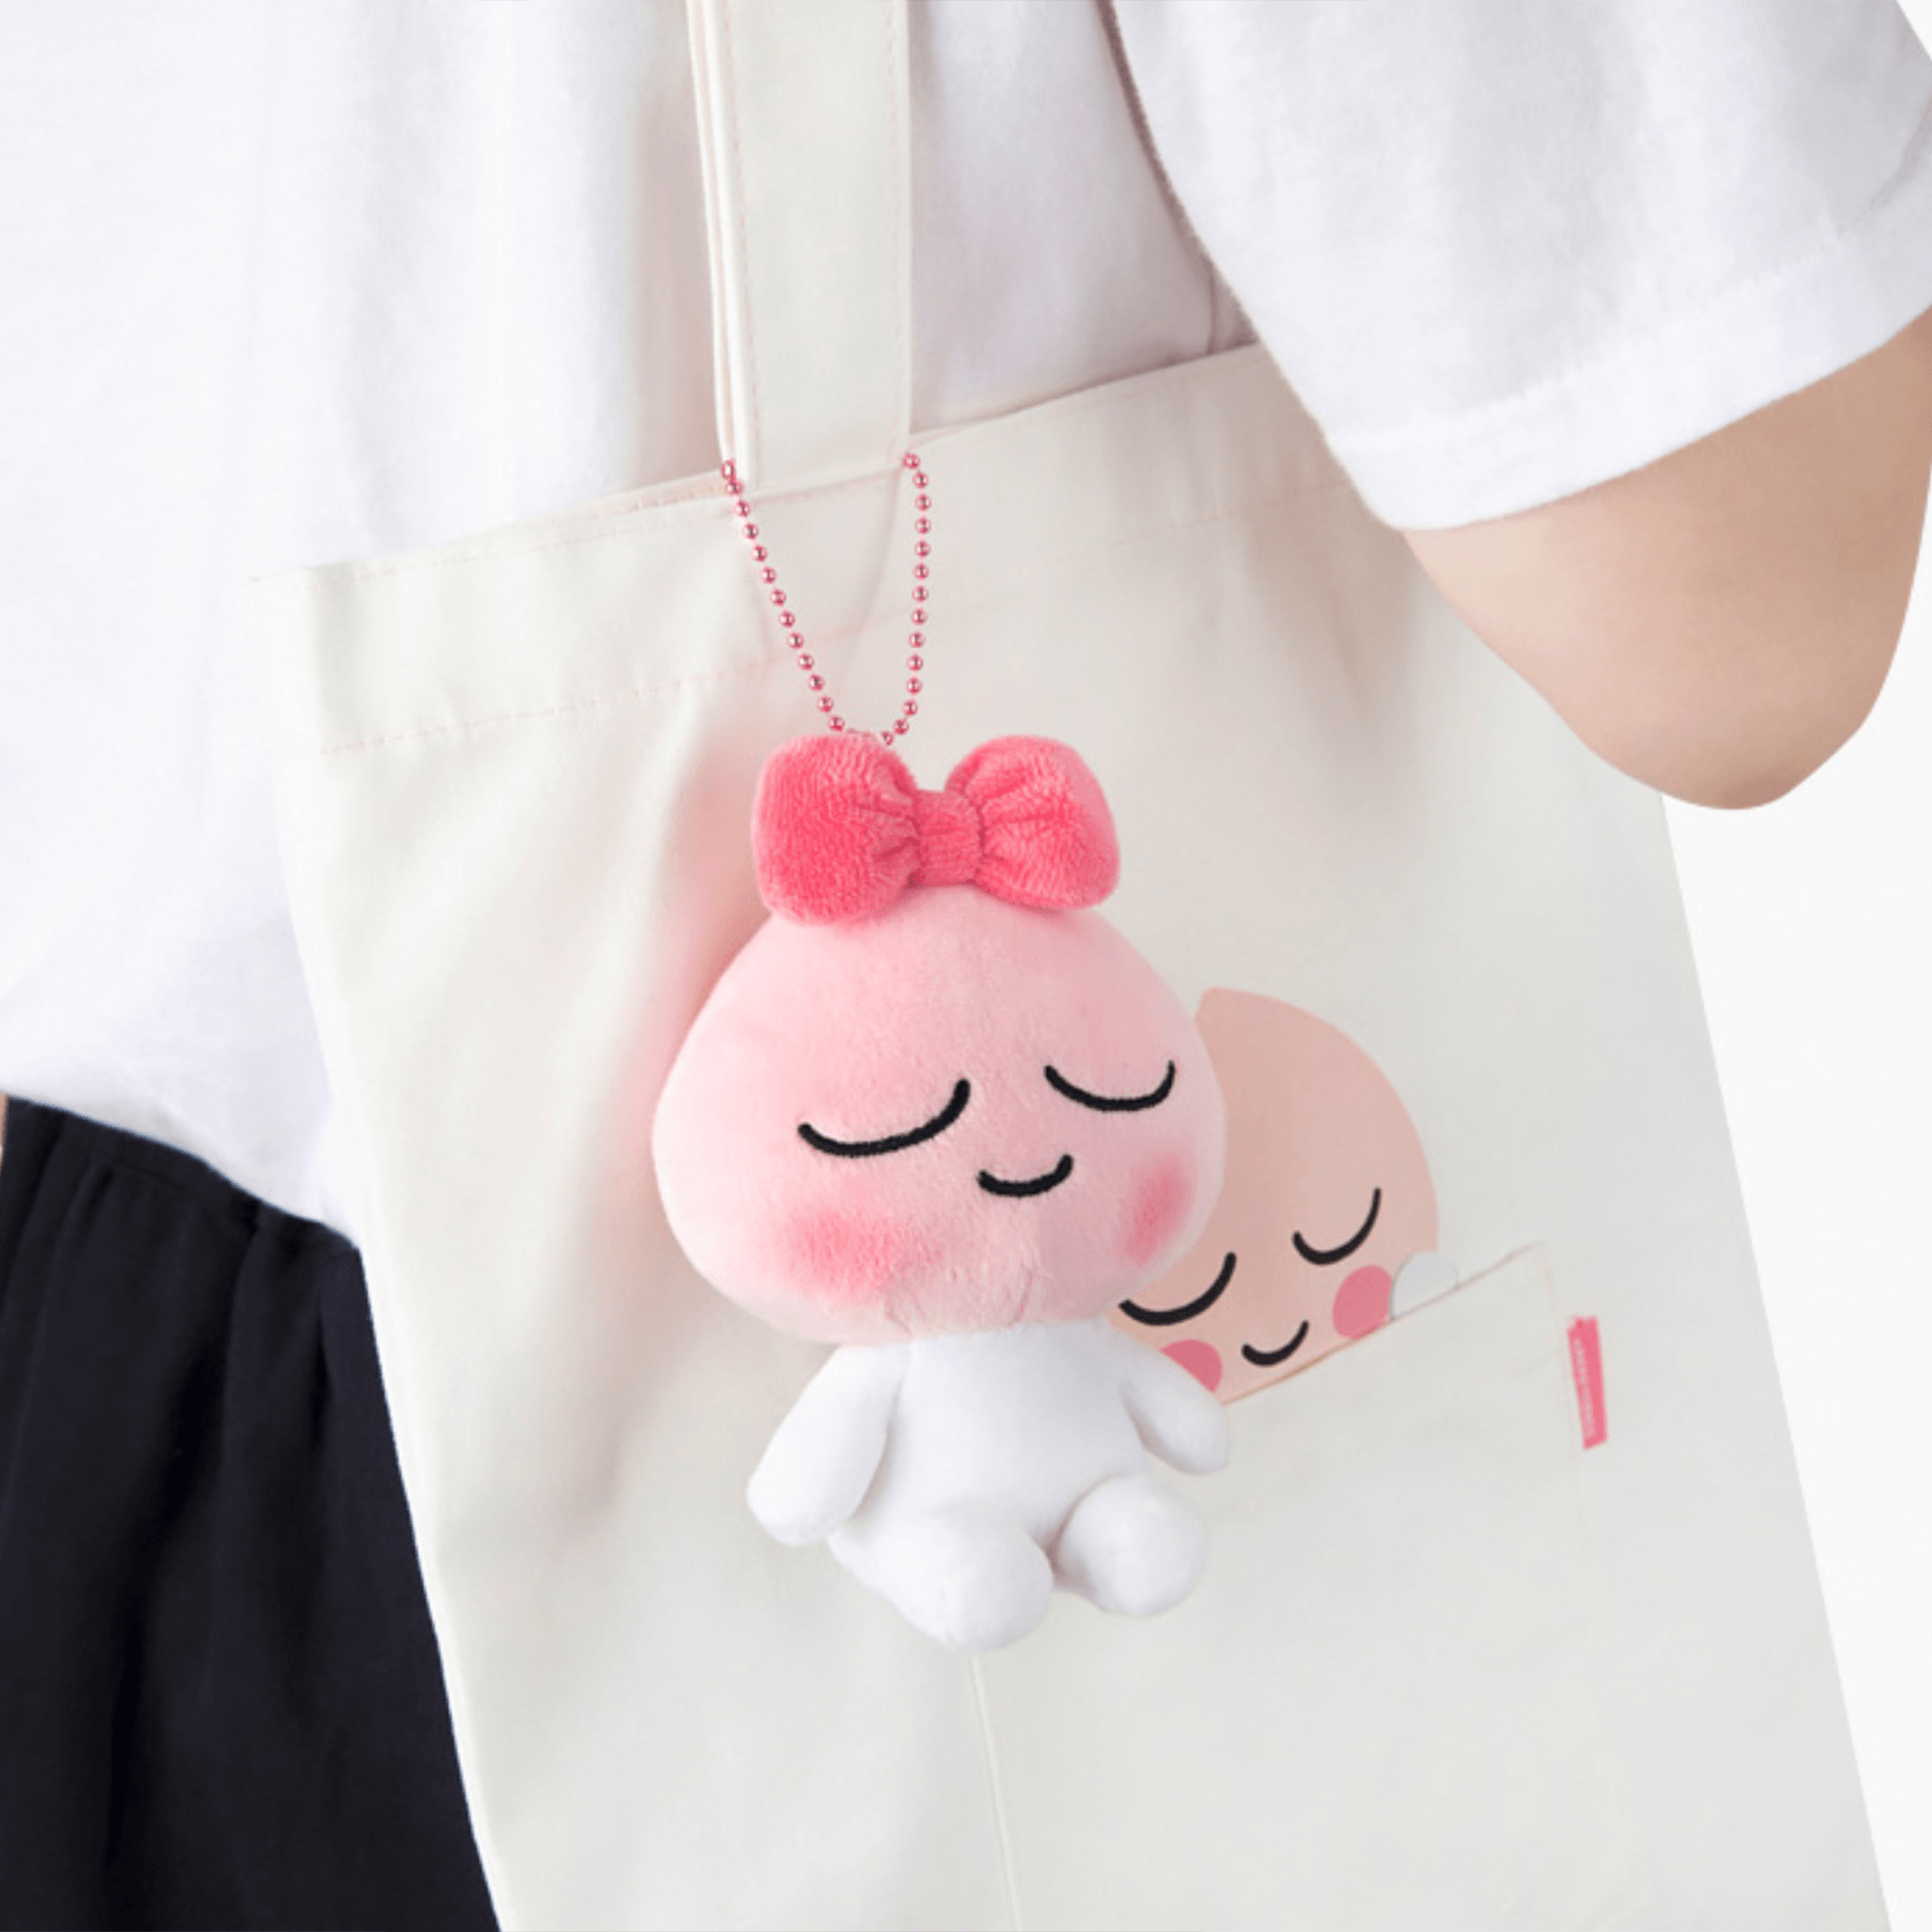 yiqohauy 3Pcs Keychain Cute Fluffy Plush Mini Doll Keychain for Women Bags Key  Ring Gift Decoration Accessories Hanging Gift, Black at Amazon Women's  Clothing store